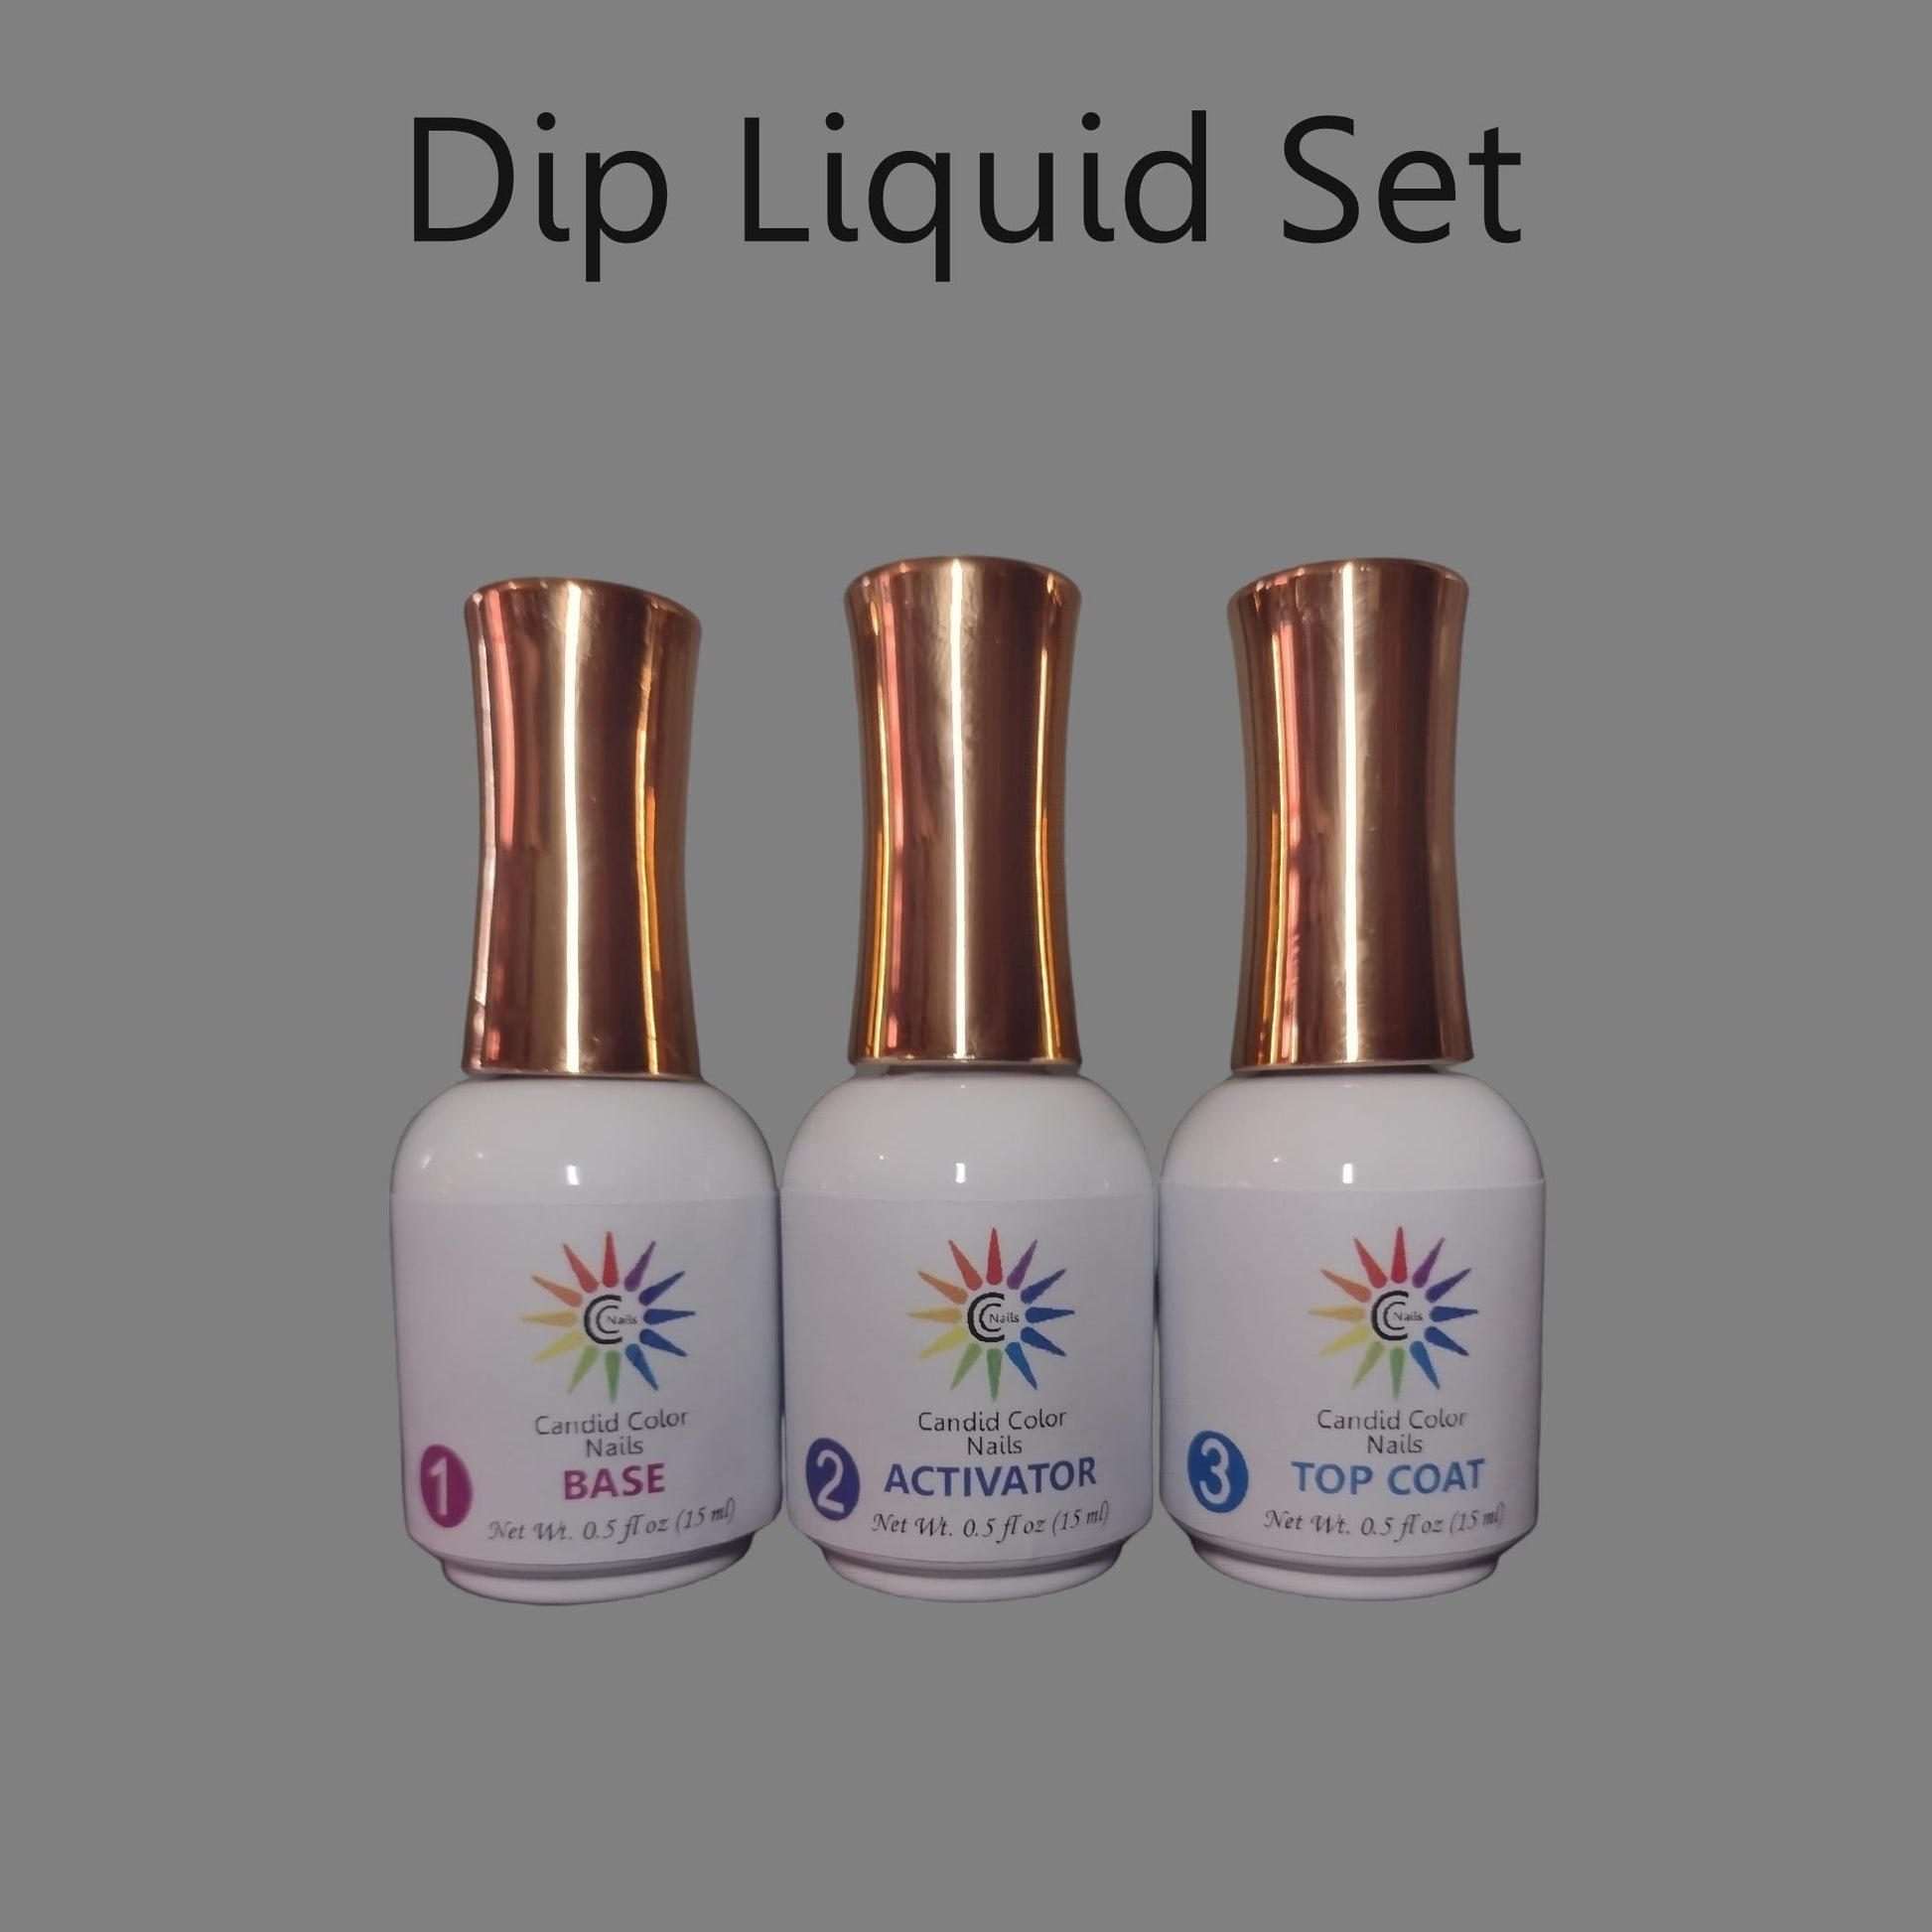 Candid Color Nails Dip Liquid Set includes Base (Step 1), Activator (Step 2), and Top Coat (Step 3).